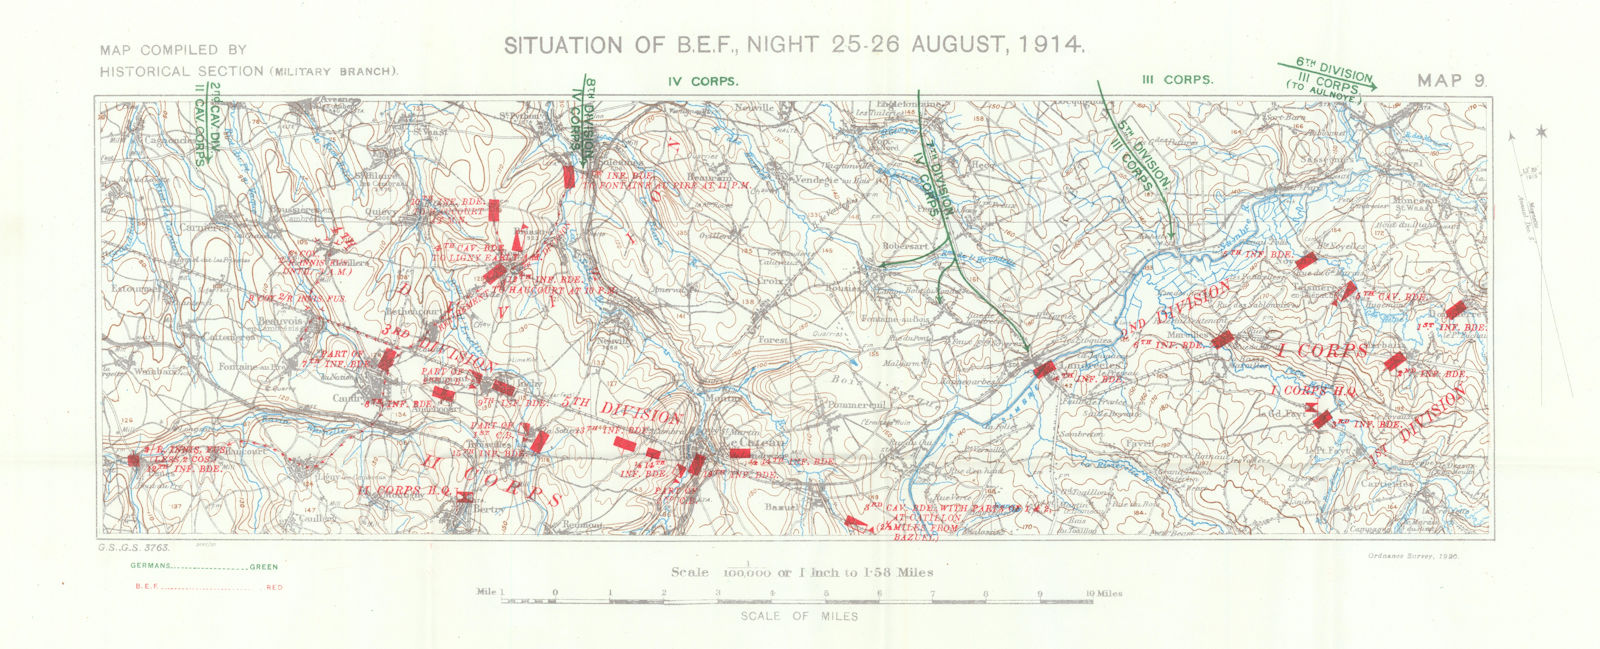 B.E.F. Situation 25-26 August, 1914. Battle of Le Cateau. WW1. 1933 old map